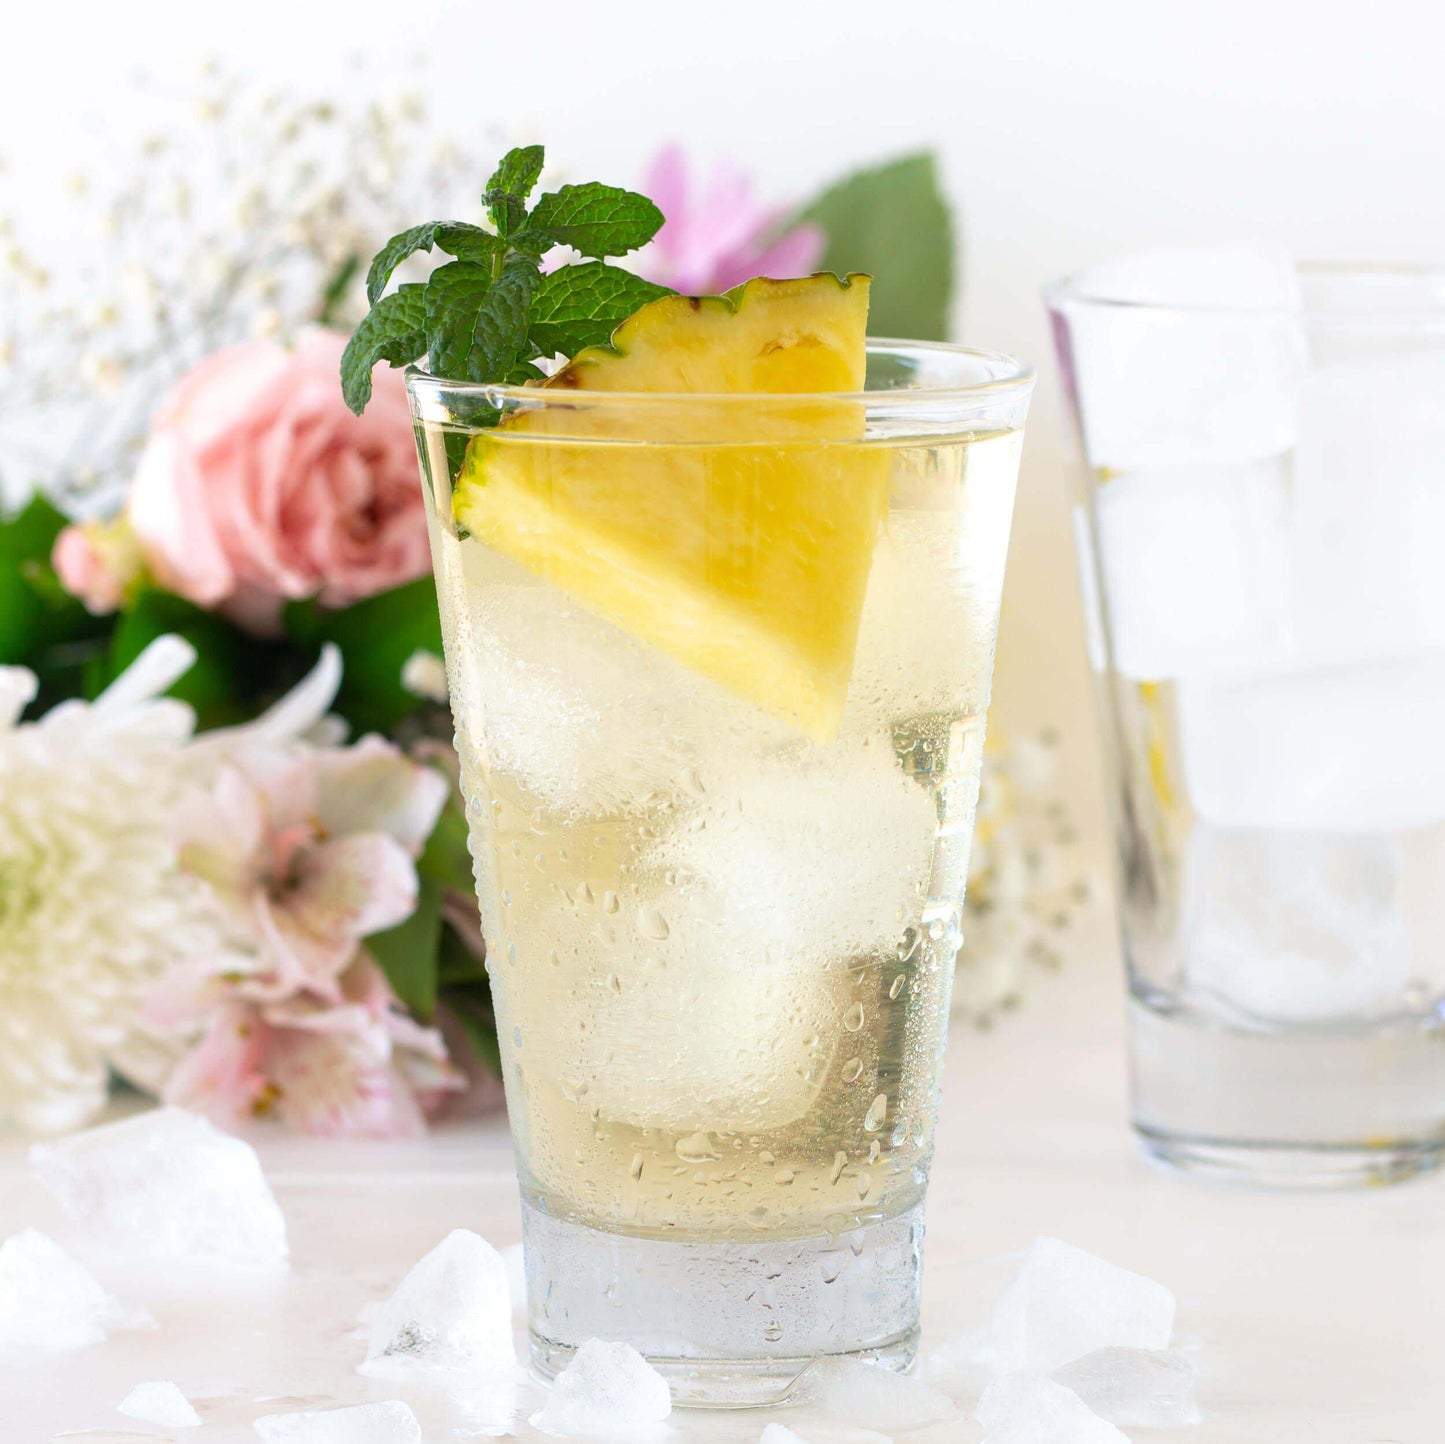 Spring Fancy Green and White Tea shown as iced tea with pineapple wedge